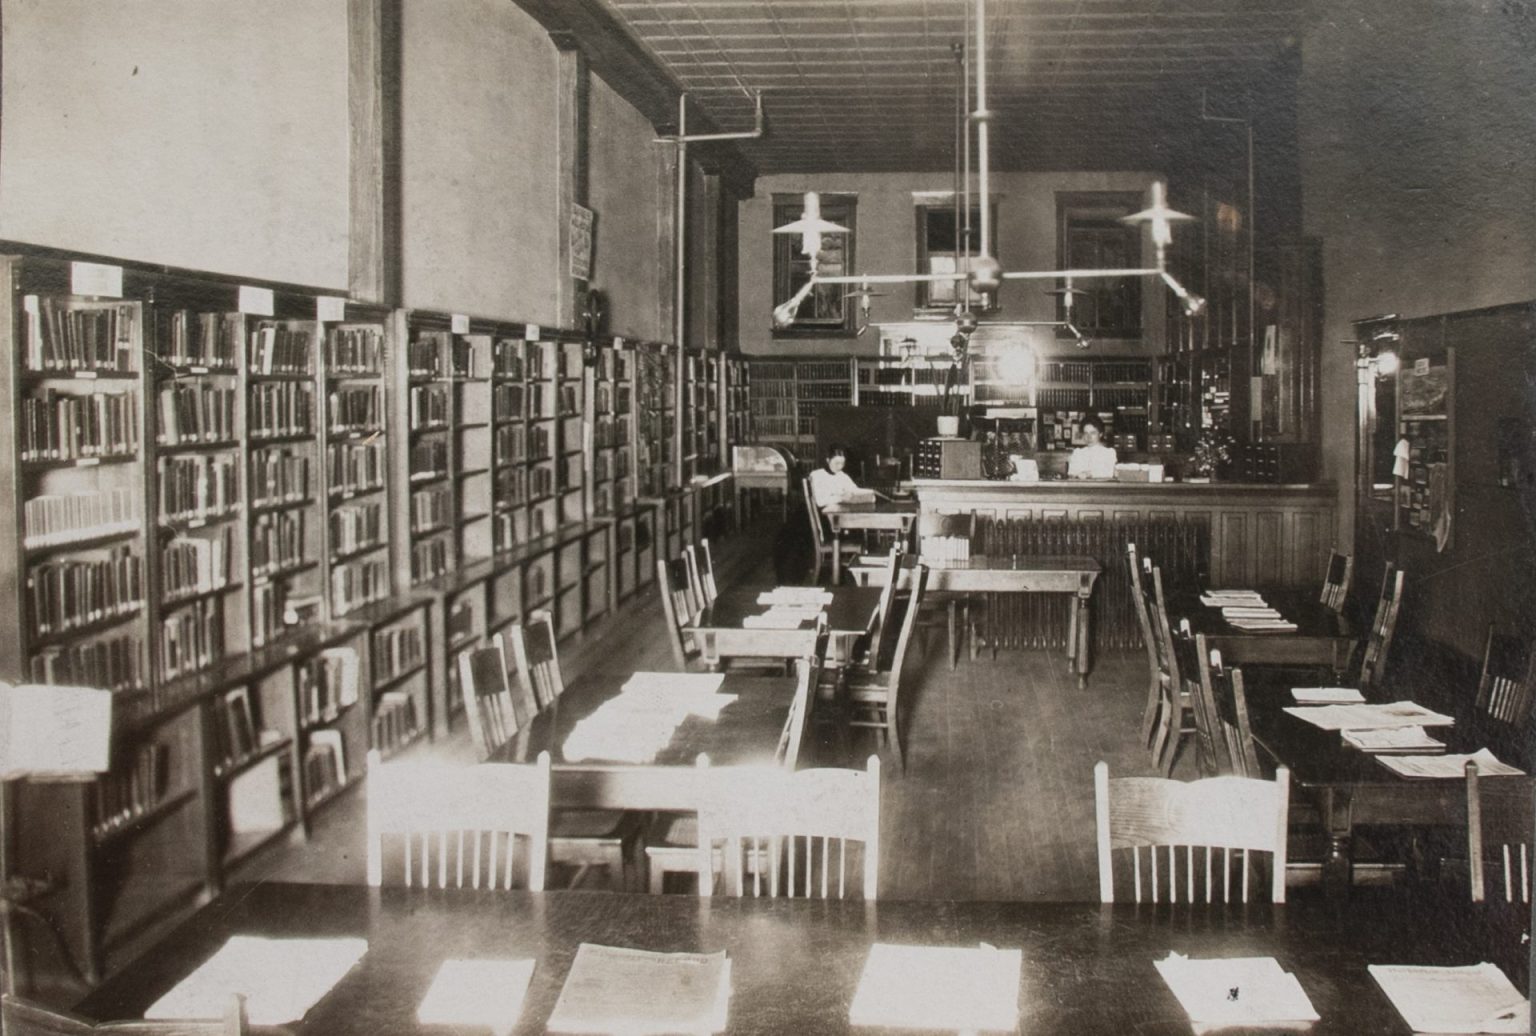 A woman sits behind a desk at the back of a room of bookshelves in this black and white photo.